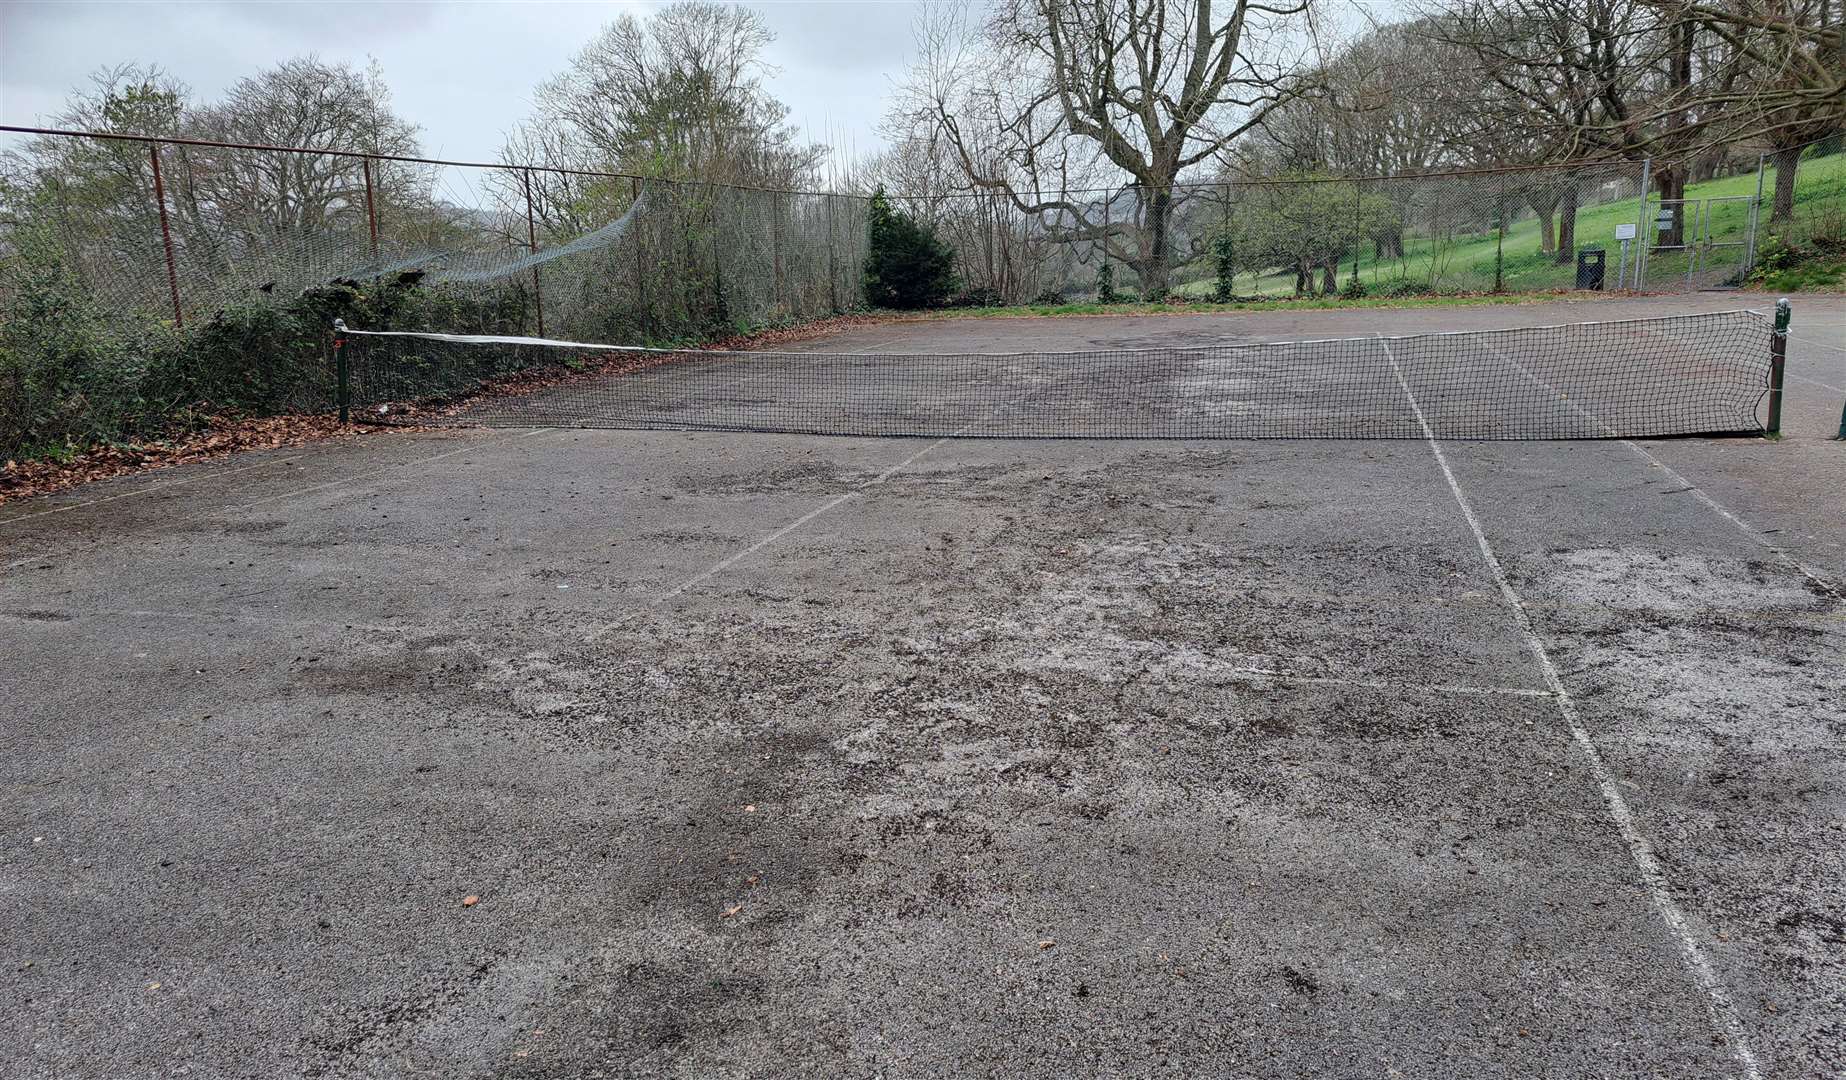 The tennis courts have fallen into a state of disrepair